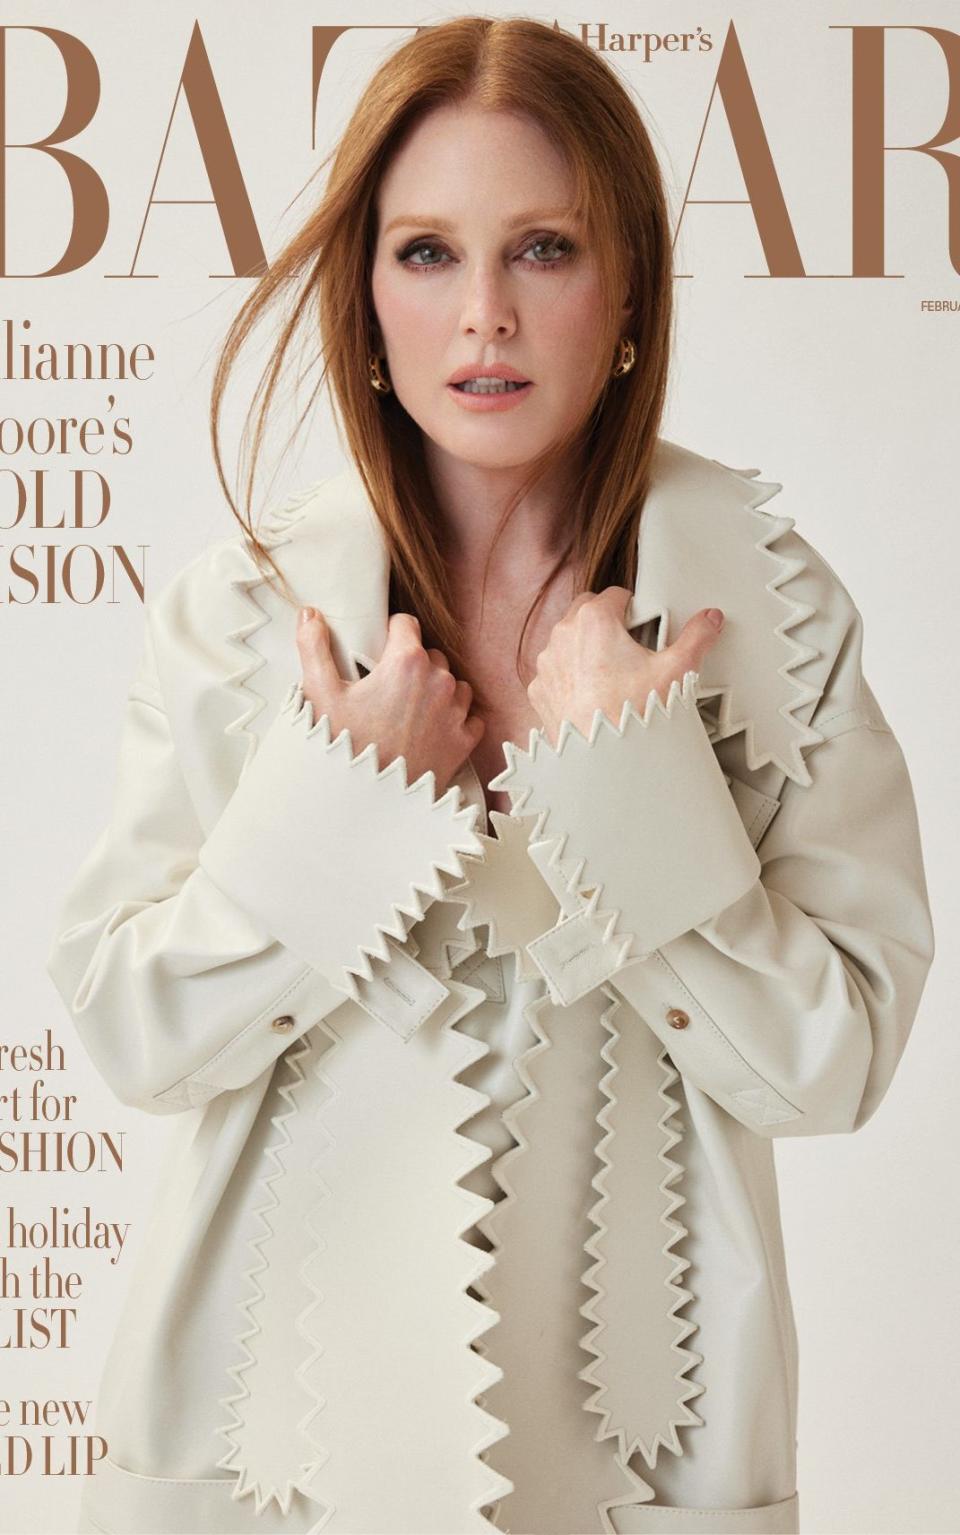 JULIANNE MOORE STARS ON THE COVER OF HARPER’S BAZAAR UK’S FEBRUARY ISSUE. The actress speaks to Bazaar about playing multi-dimensional characters, taking pride in her Scottish roots, and wanting to have it all.